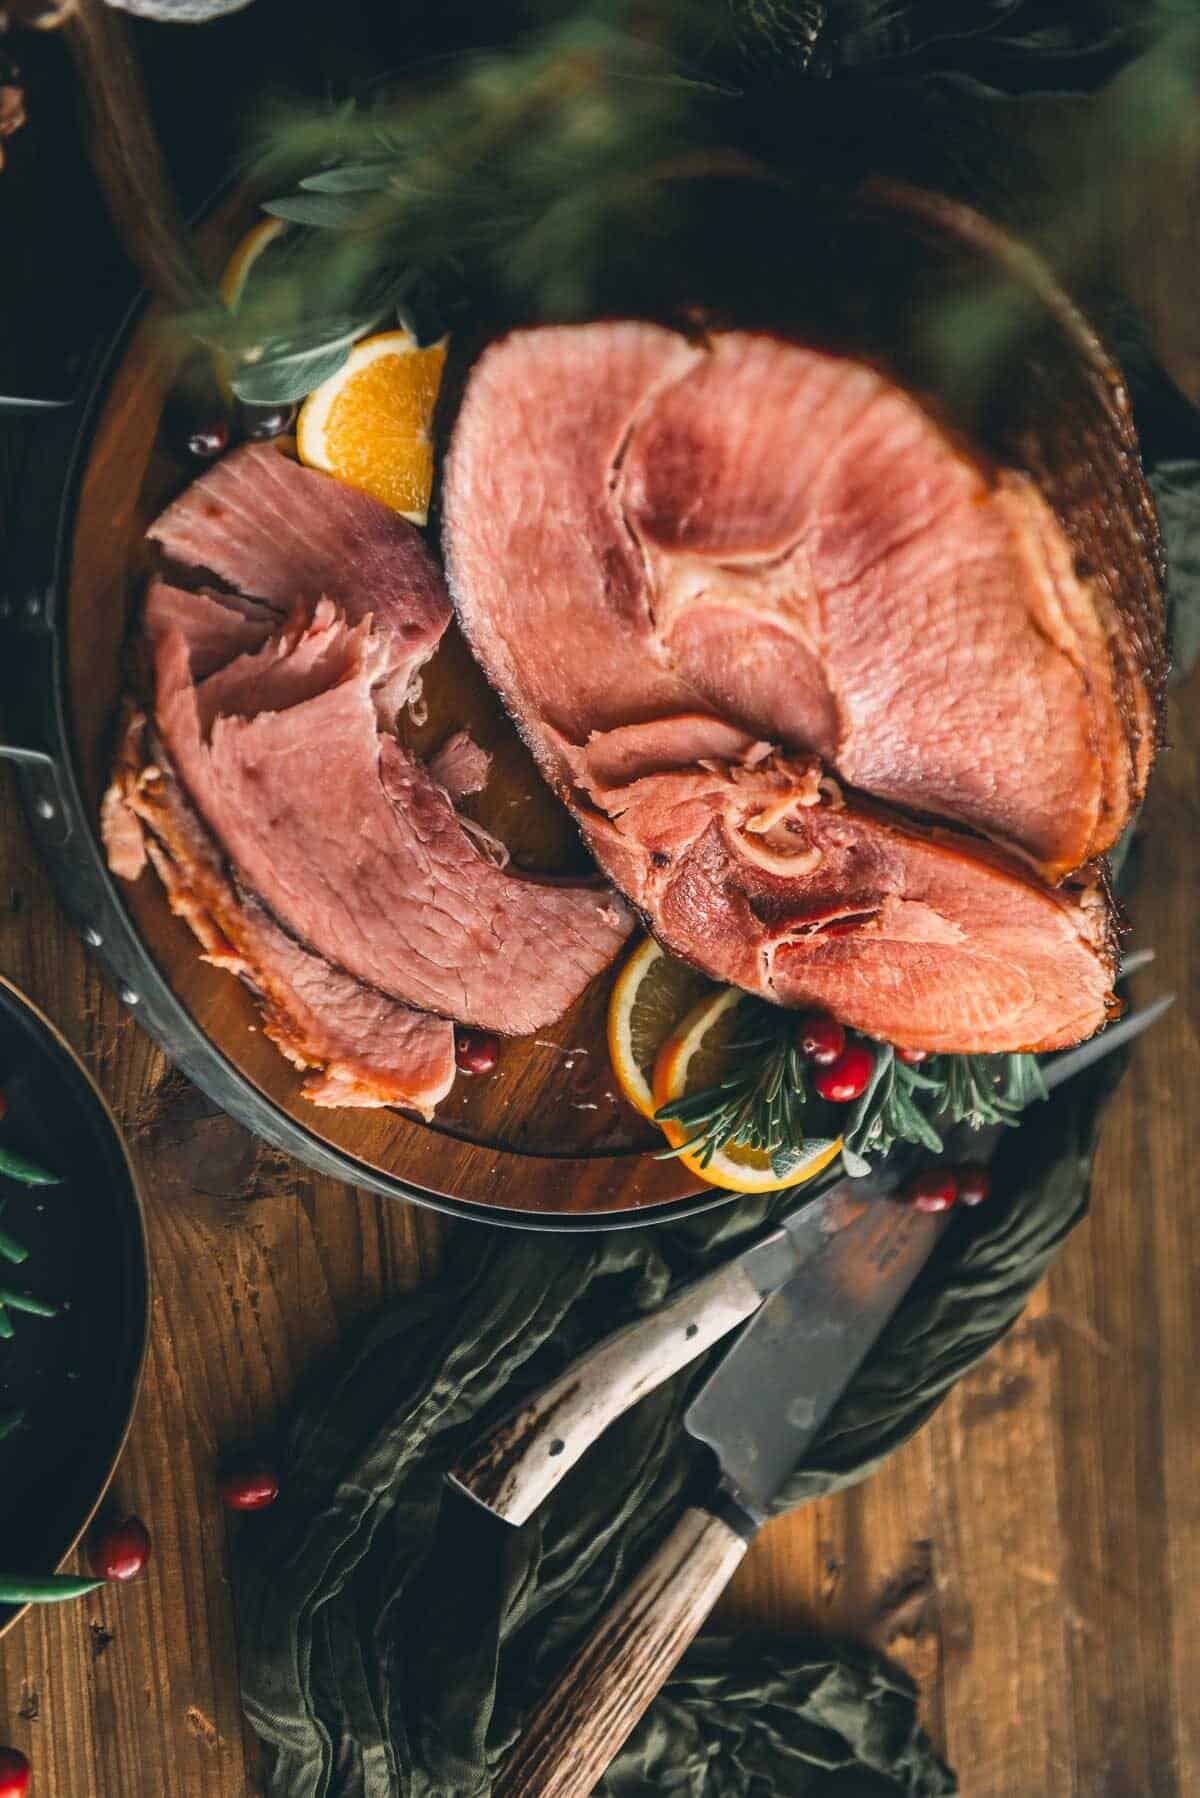 Sliced spiral ham on a wooden table with cranberries.